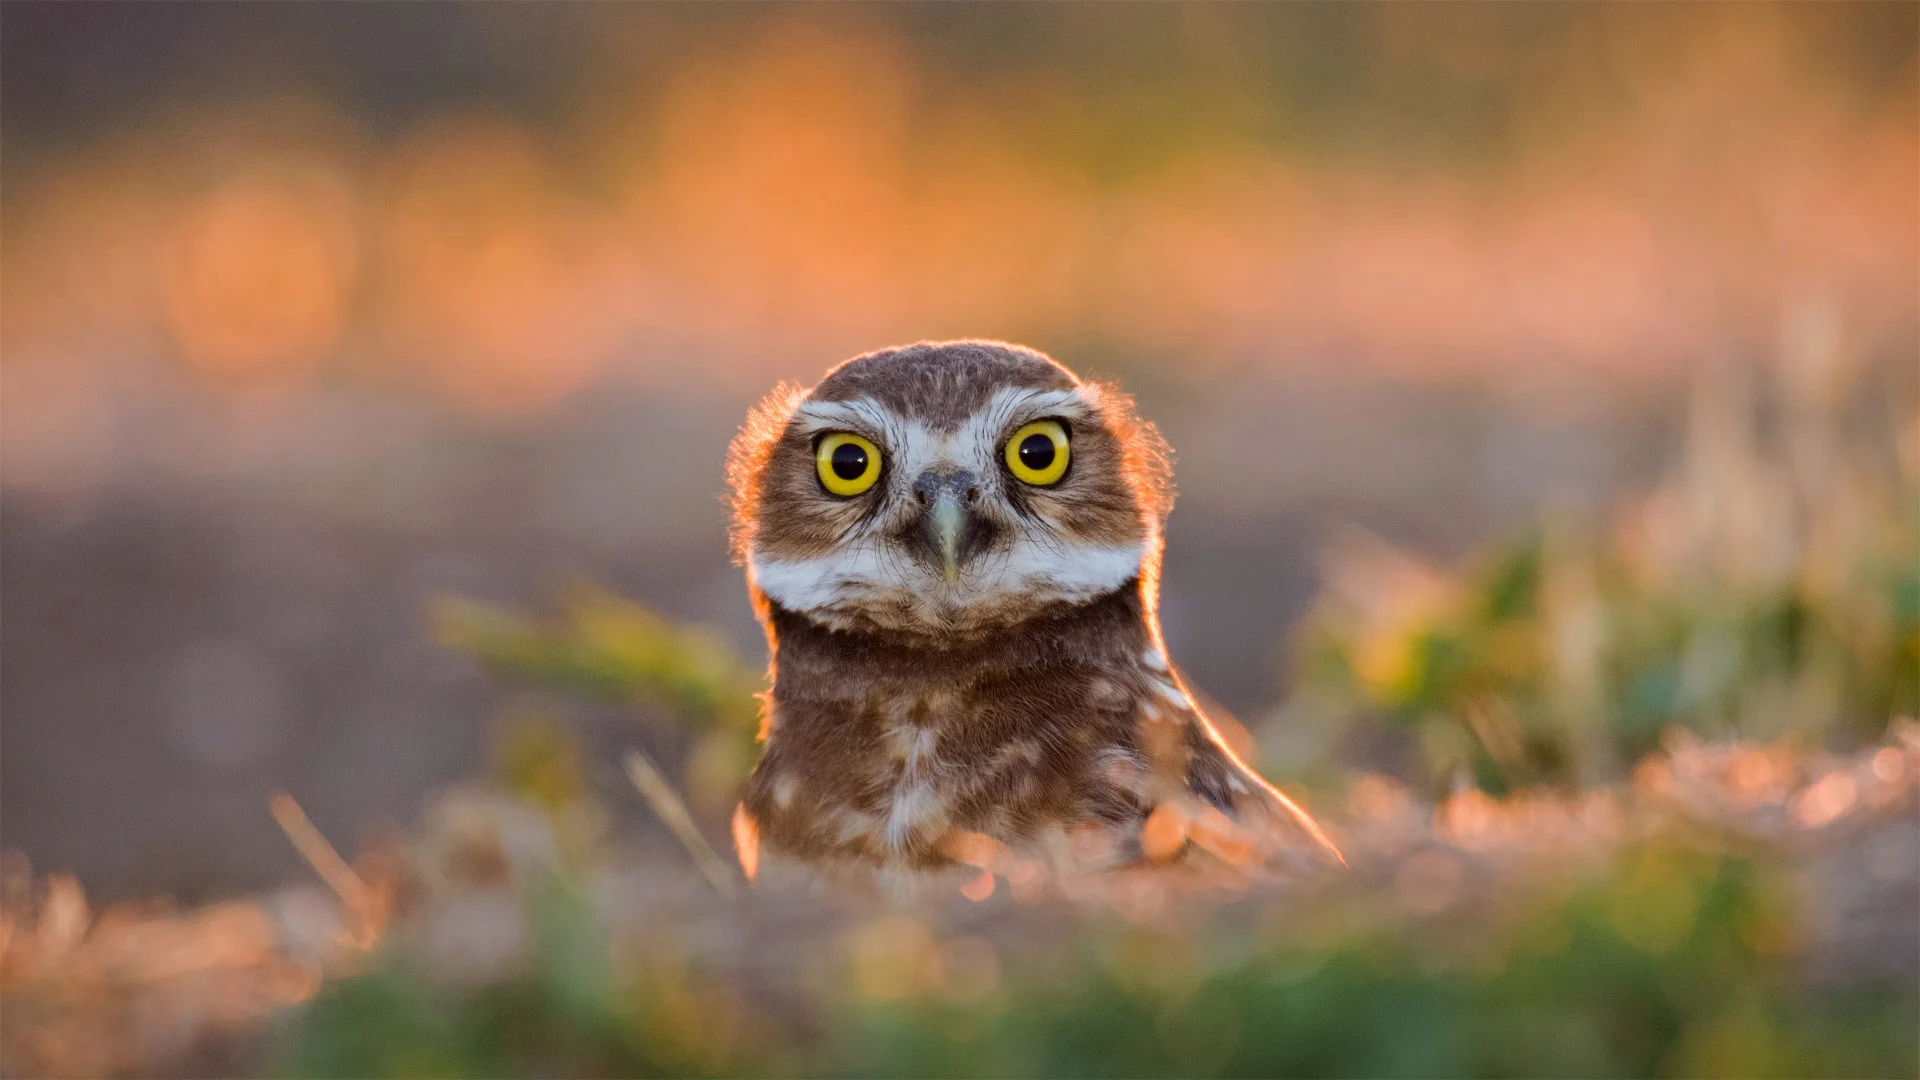 burrowing owl : Here’s looking at you